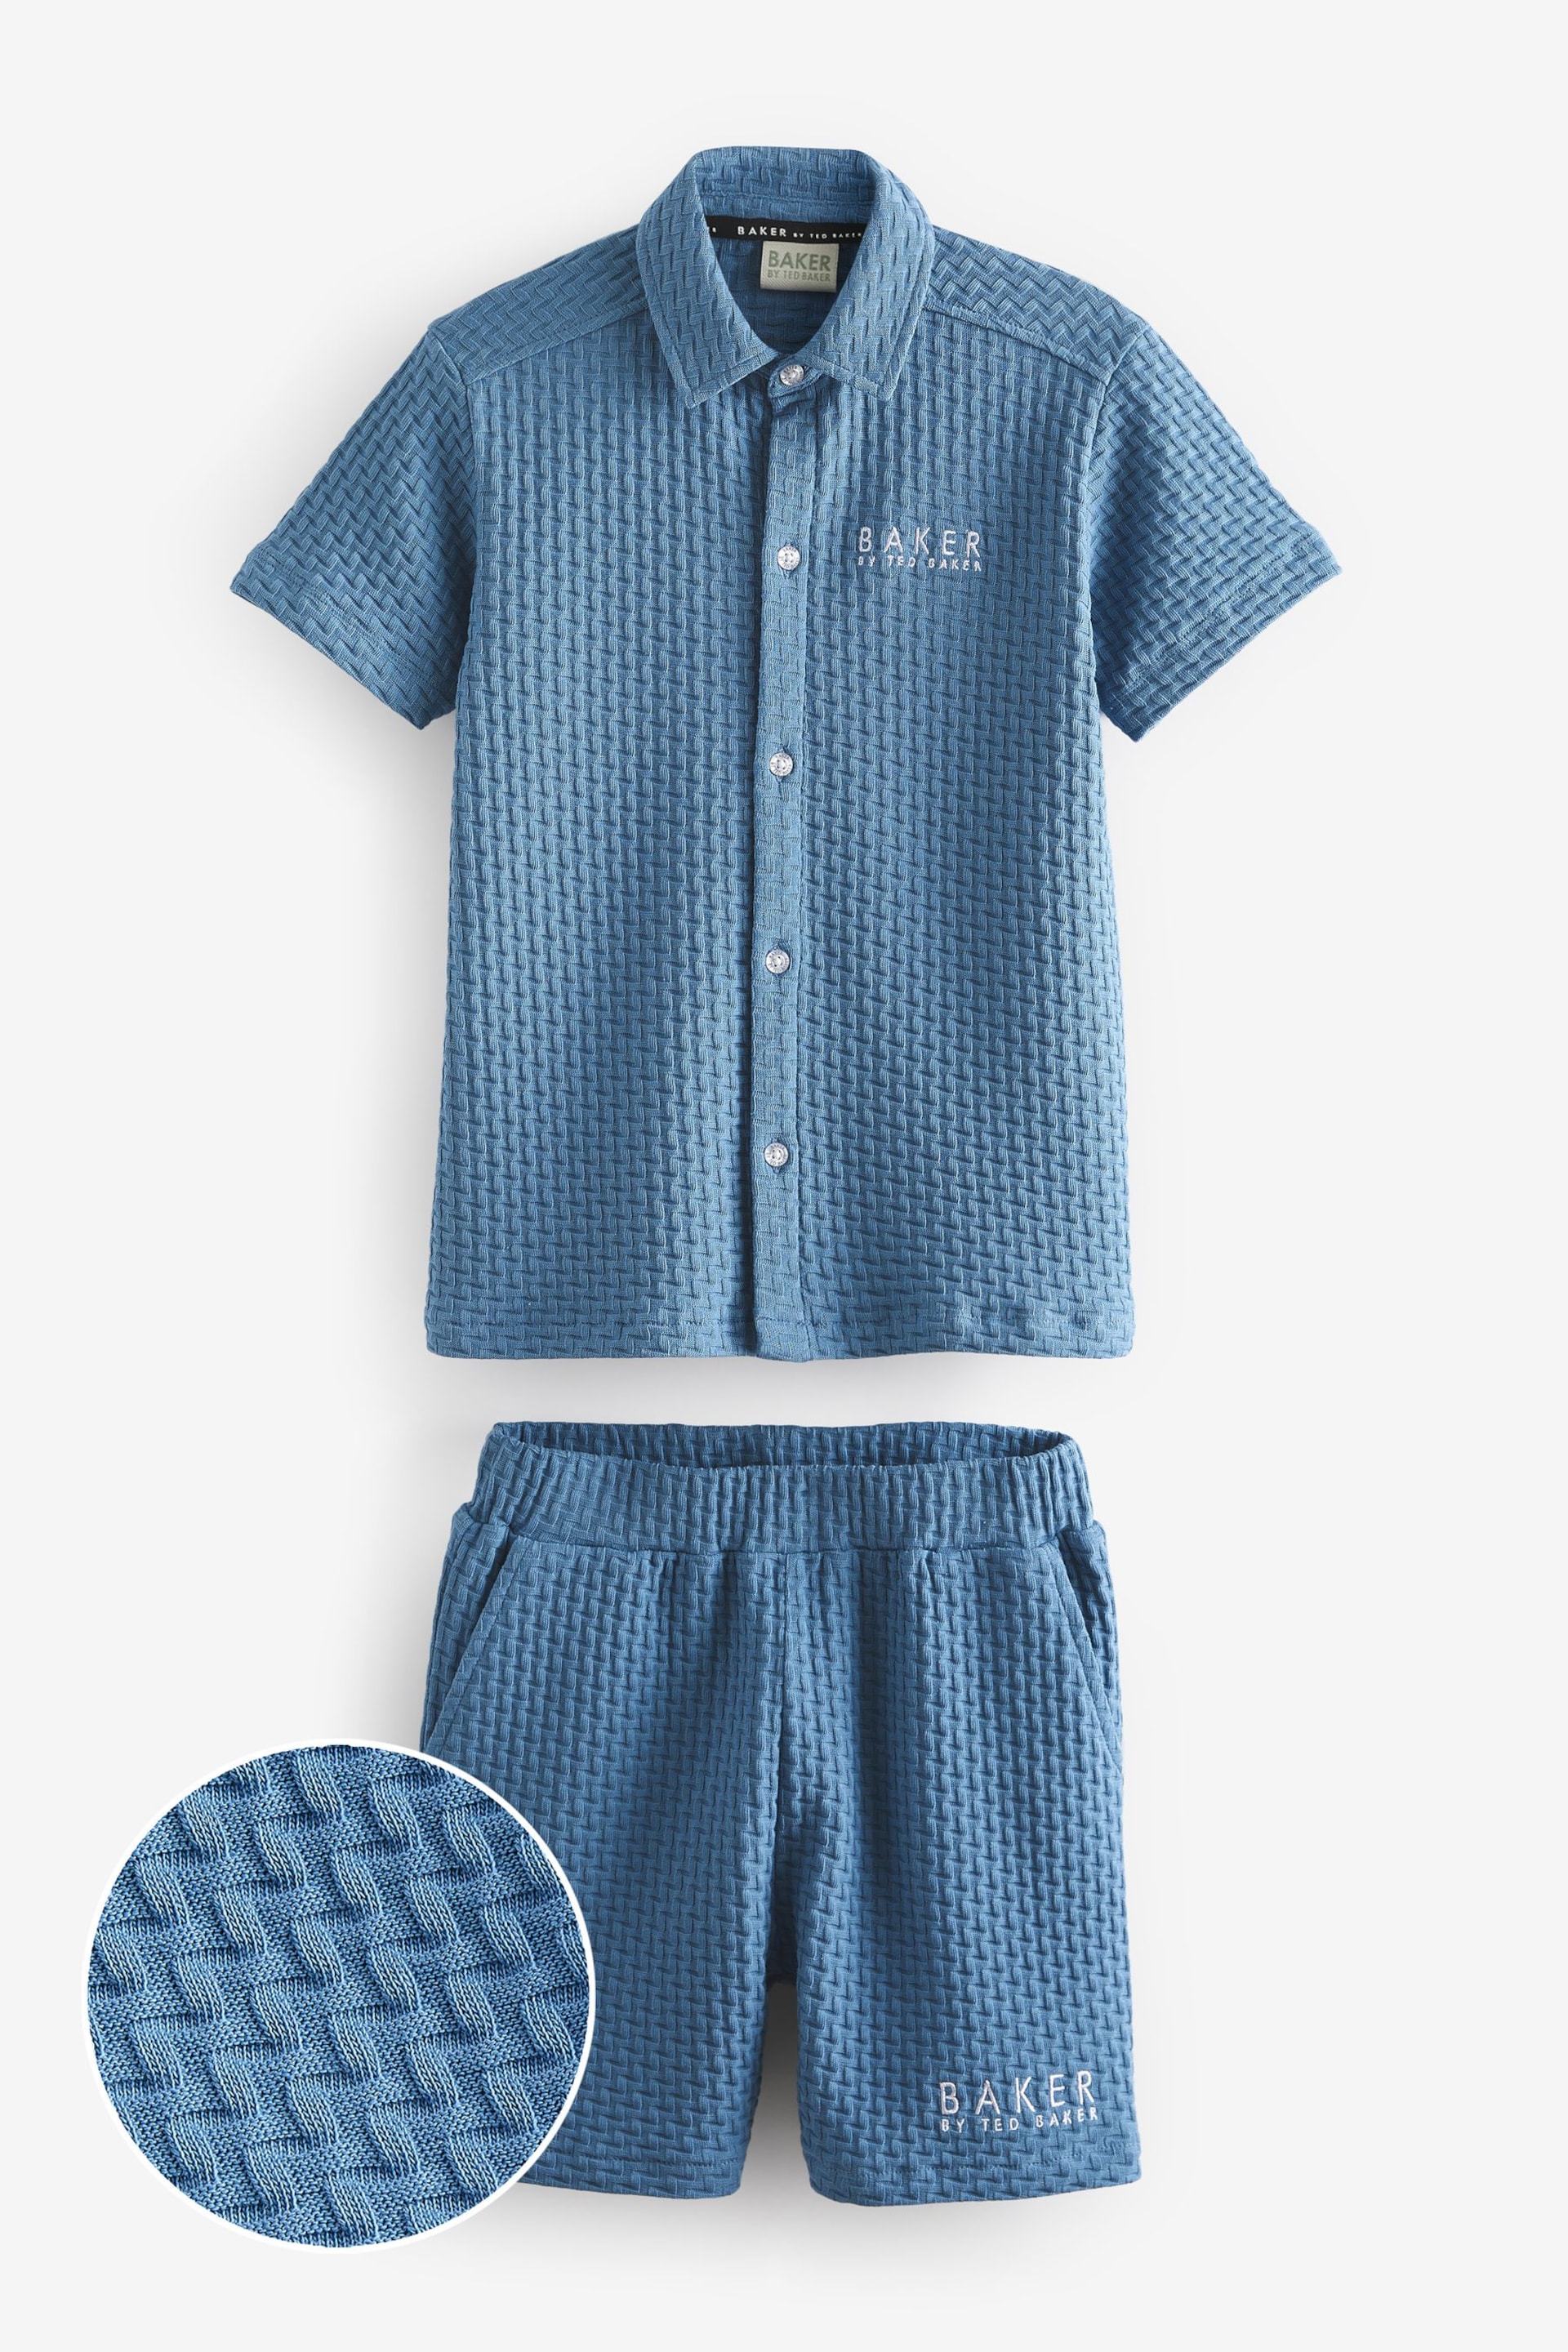 Baker by Ted Baker Textured Polo Shirt and Shorts Set - Image 1 of 14